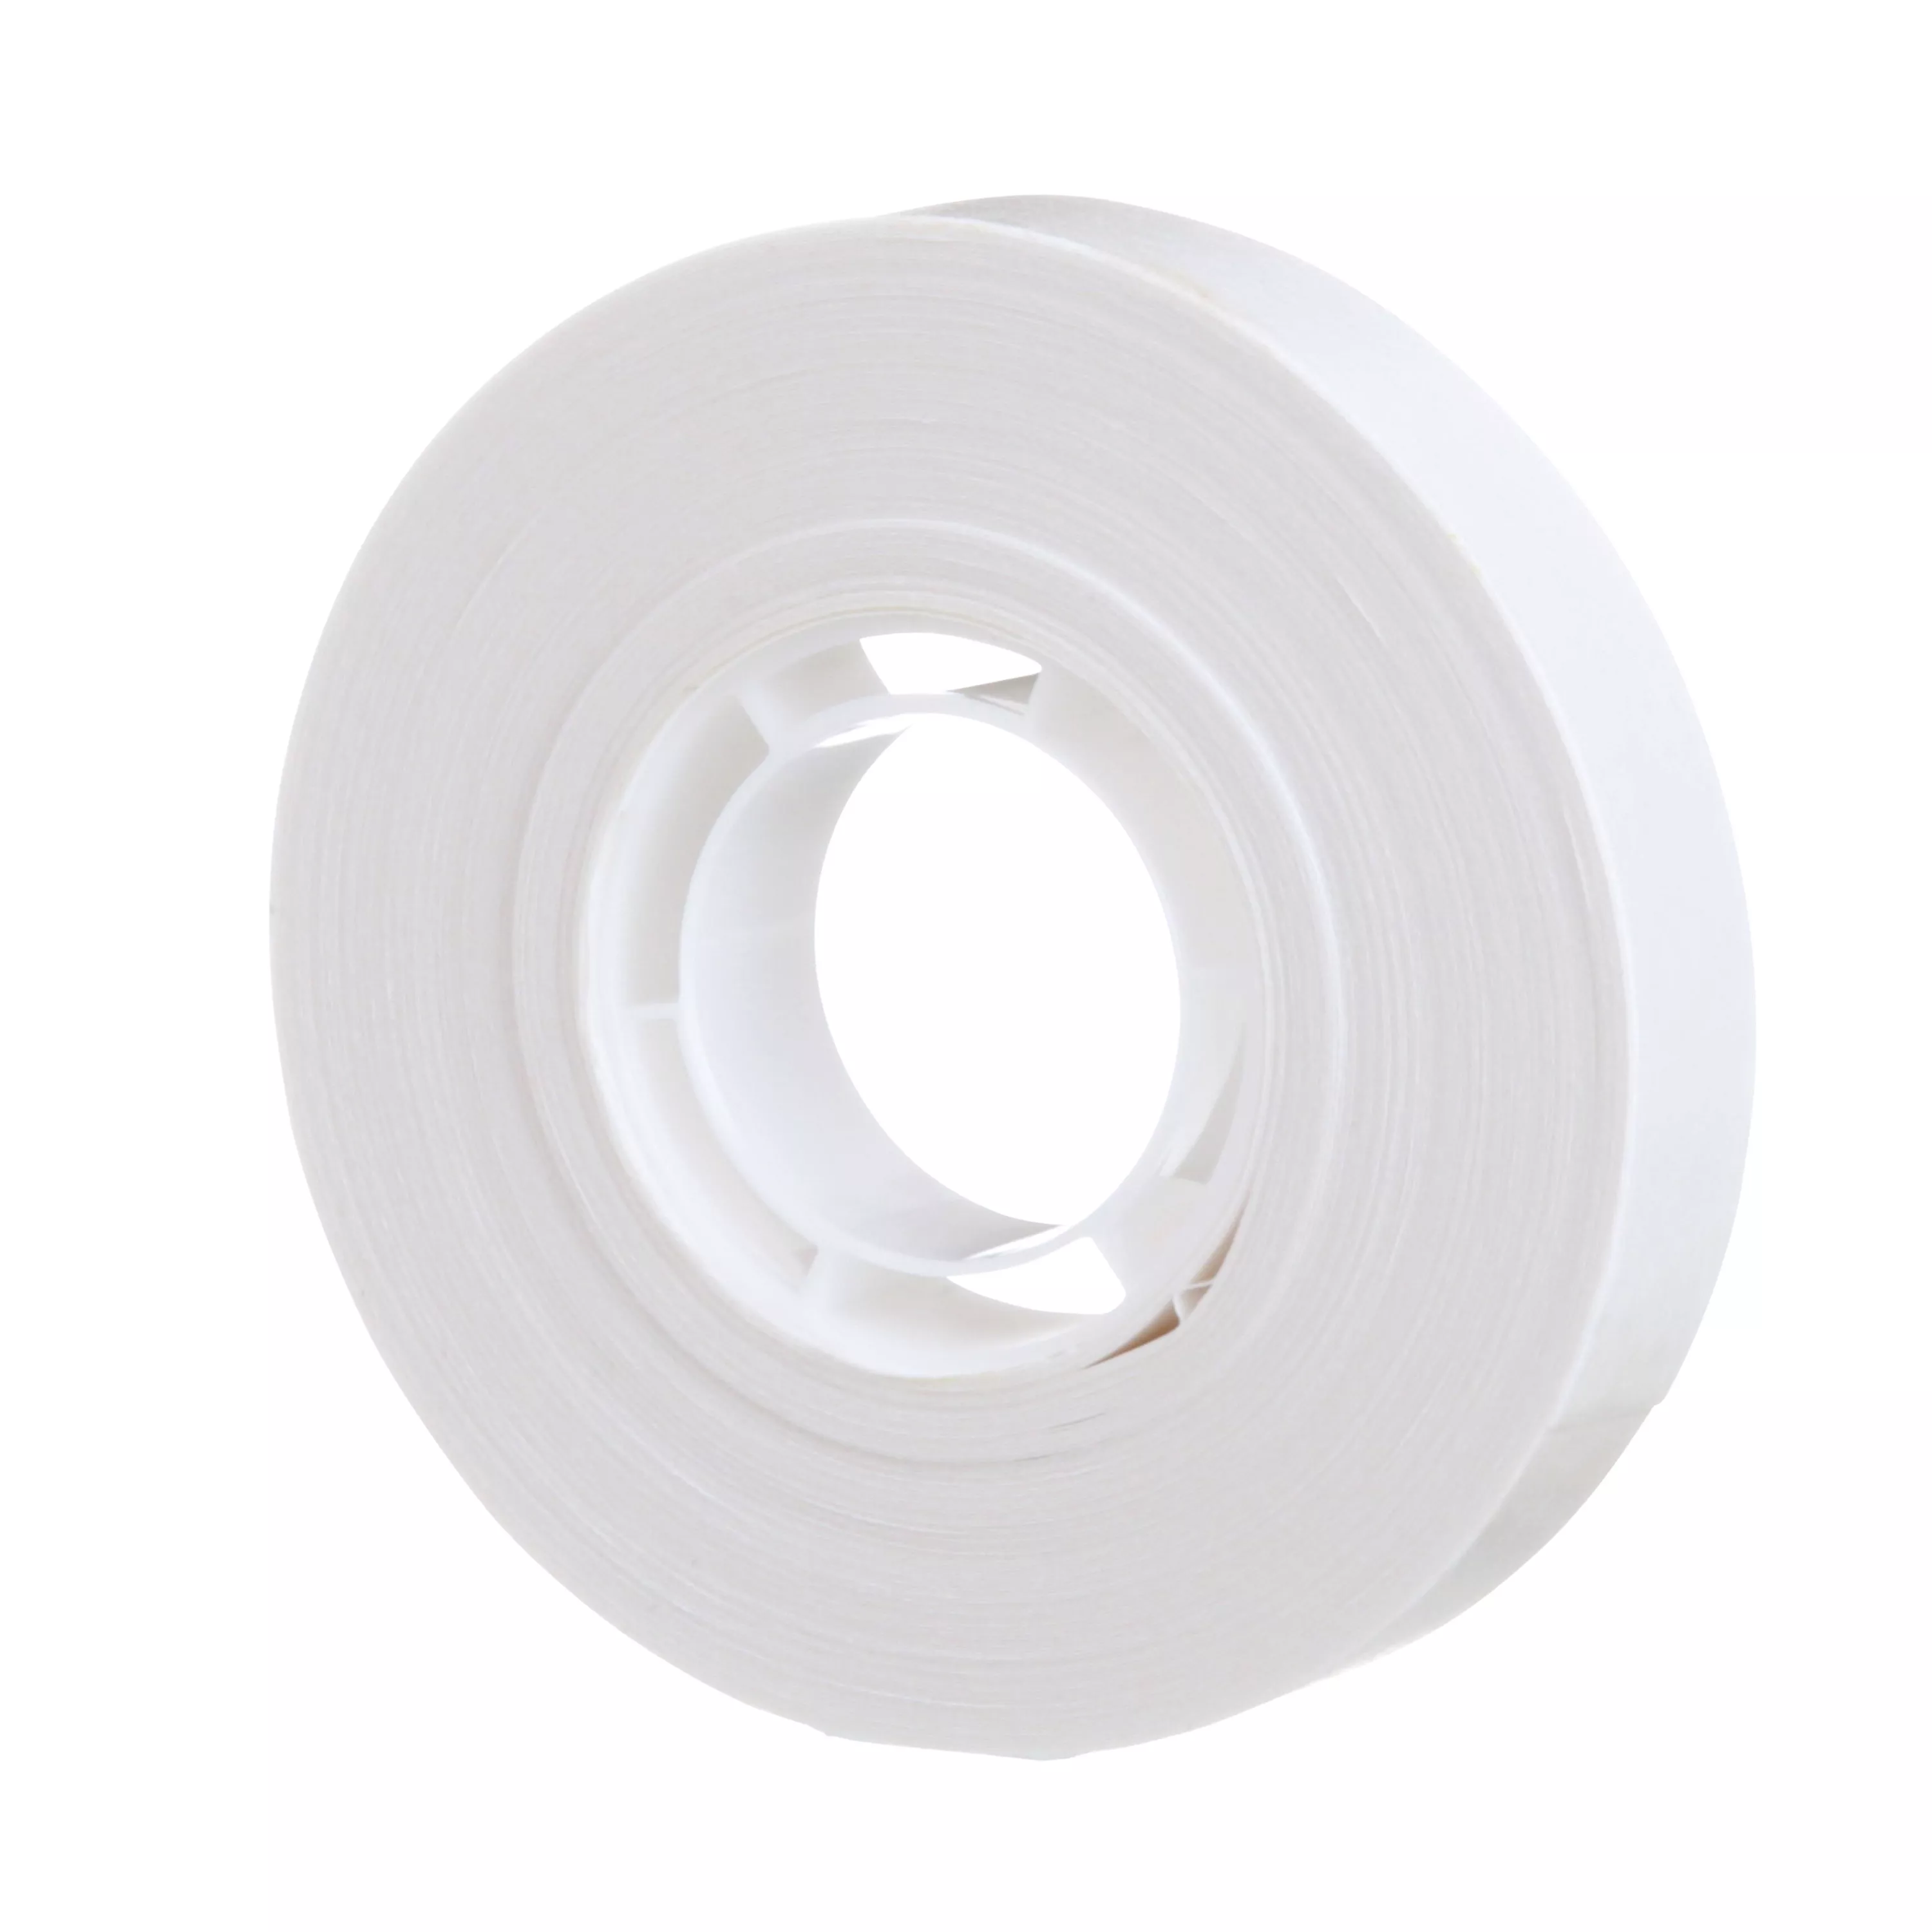 SKU 7000028874 | Scotch® ATG Repositionable Double Coated Tissue Tape 928